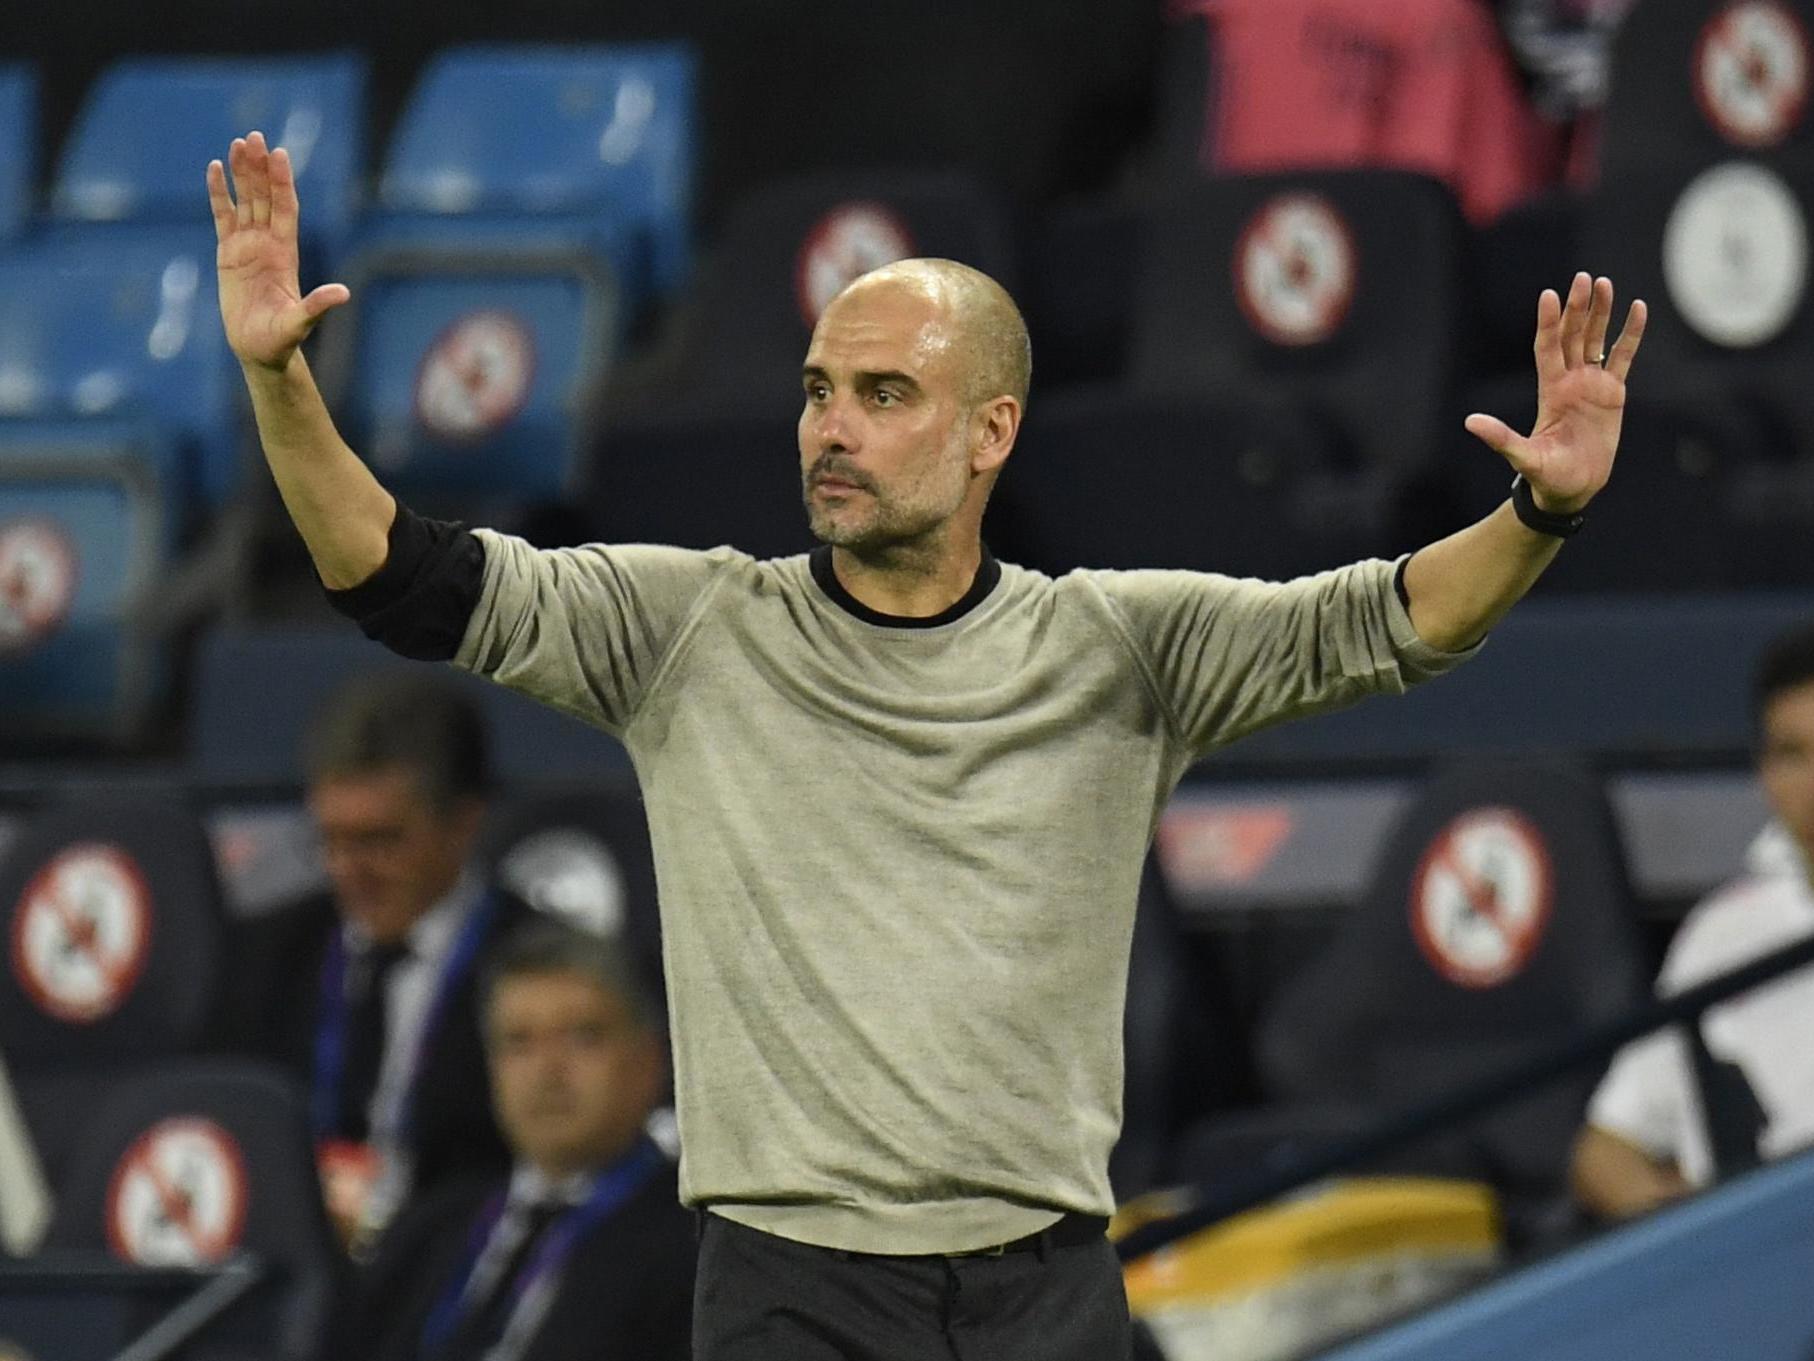 Pep Guardiola hails 'incredible' Man City players after knocking Real Madrid out of Champions League